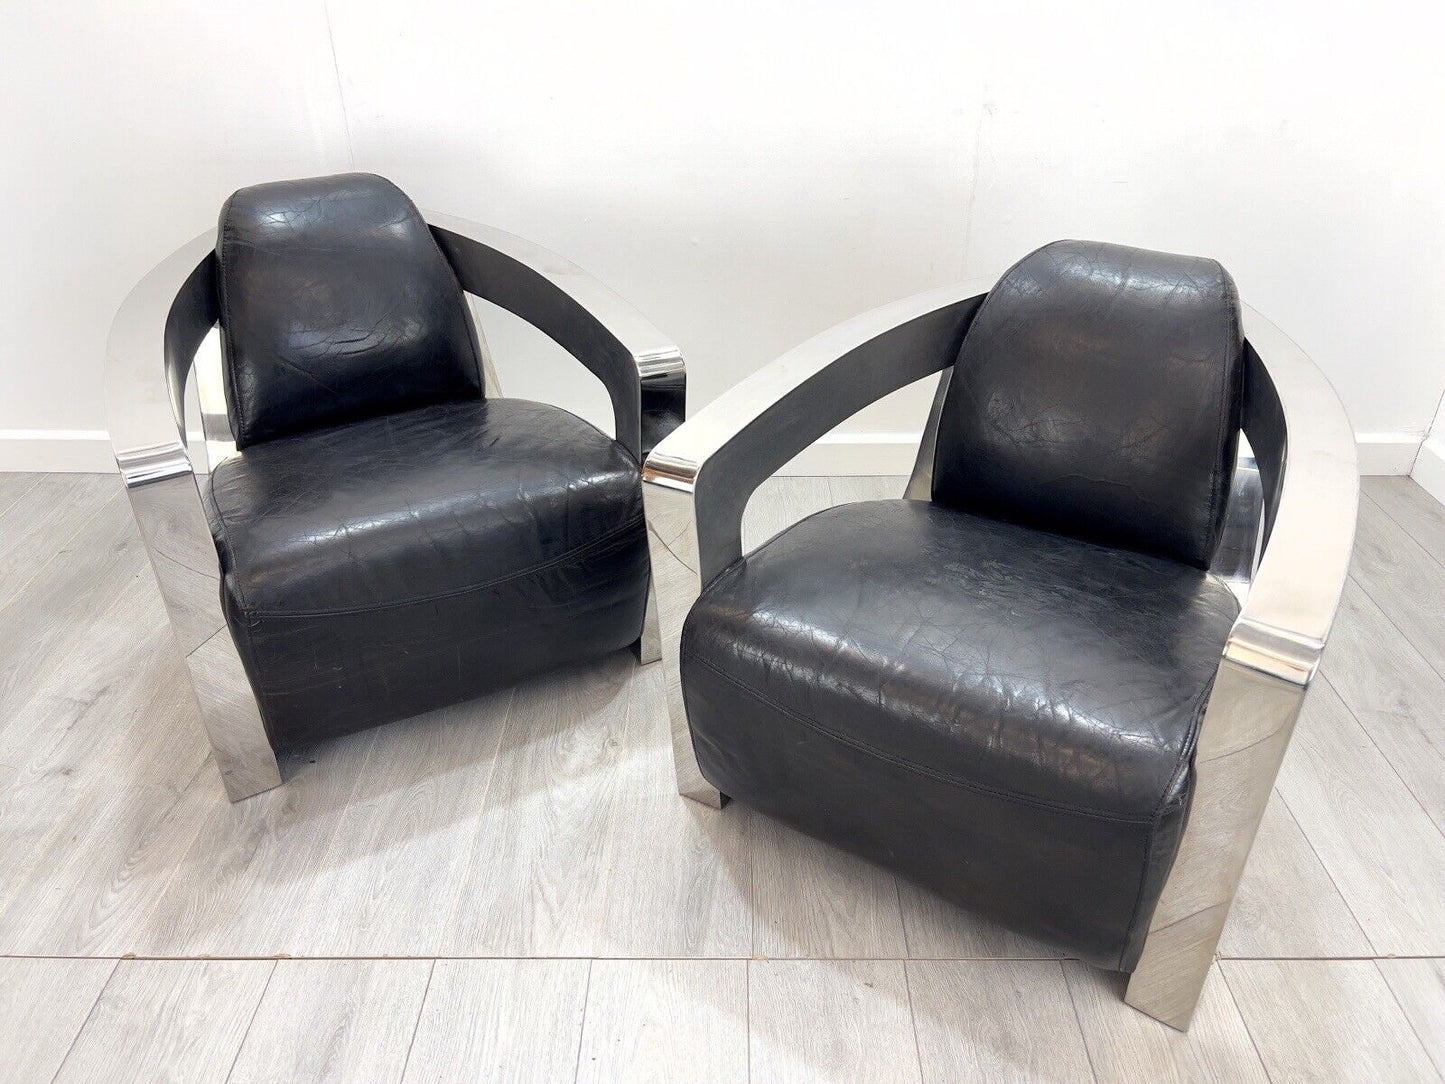 Pair of Timothy Oulton, Halo Mars MK1 Chairs